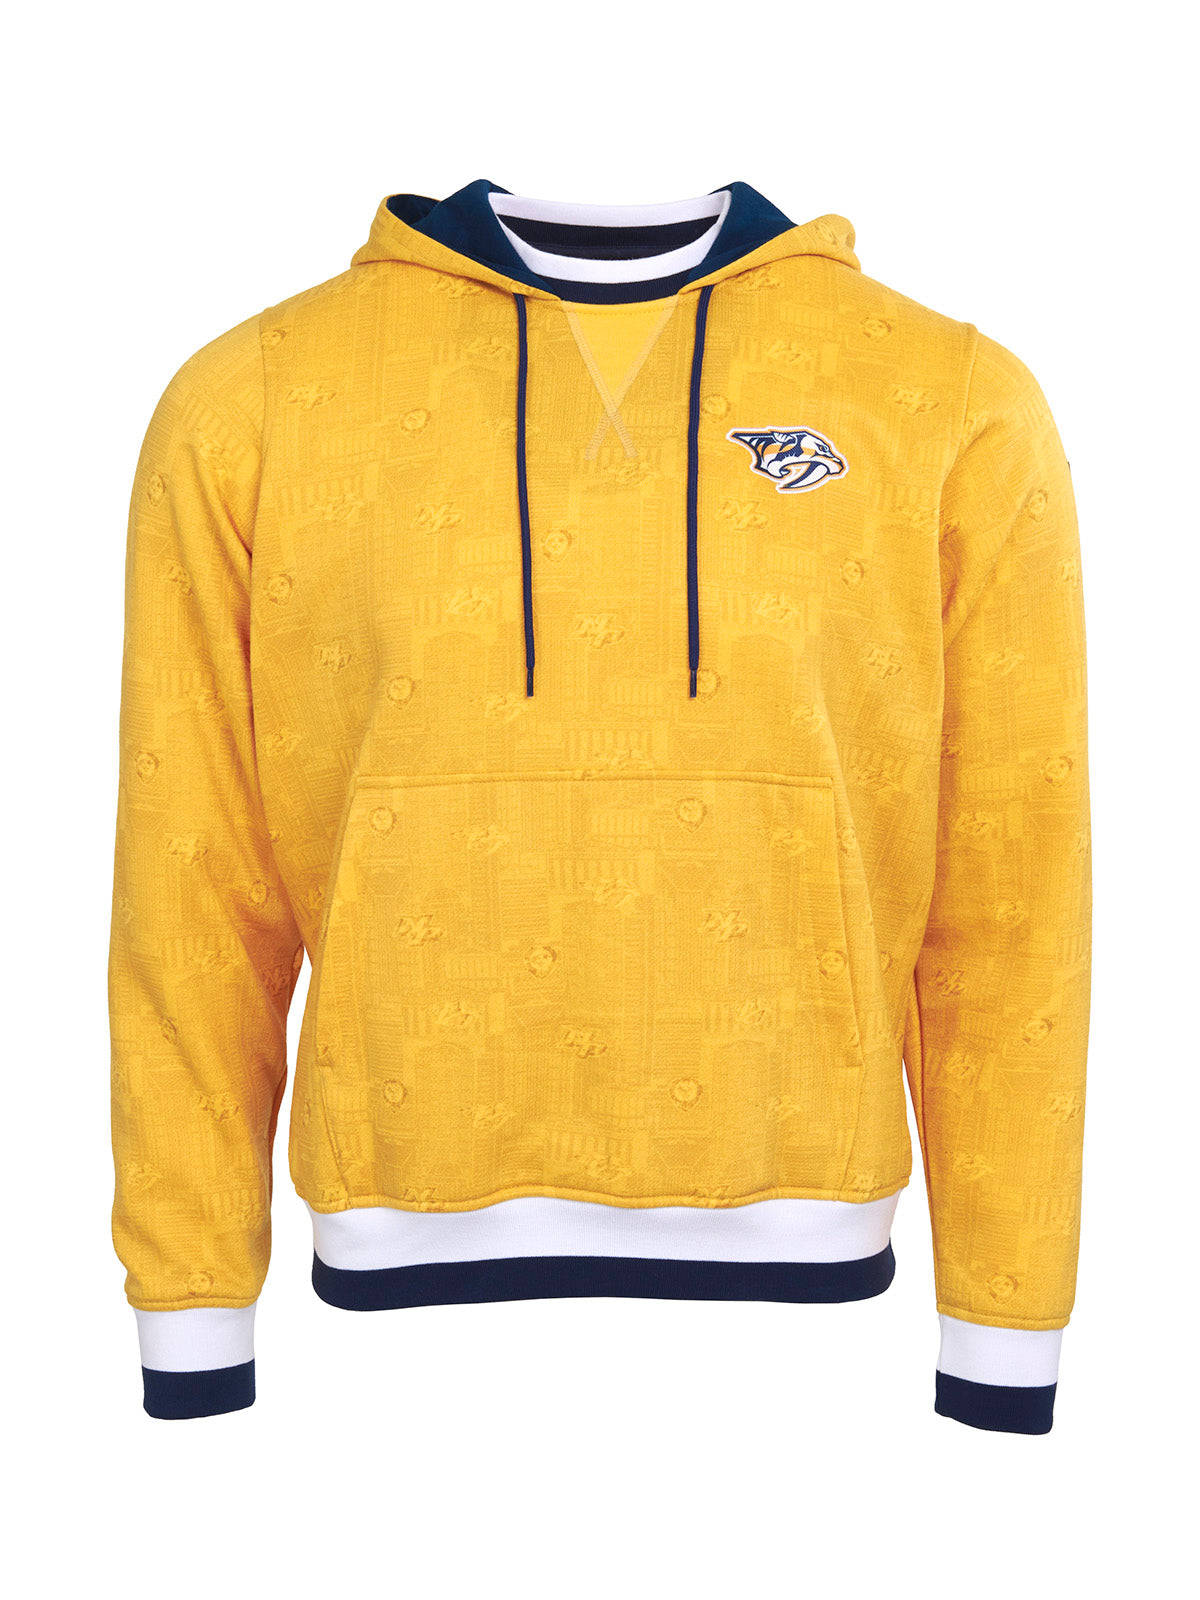 Nashville Predators Hoodie - Show your team spirit, with the iconic team logo patch on the front left chest, and proudly display your Nashville Predators support in their team colors with this NHL hockey hoodie.